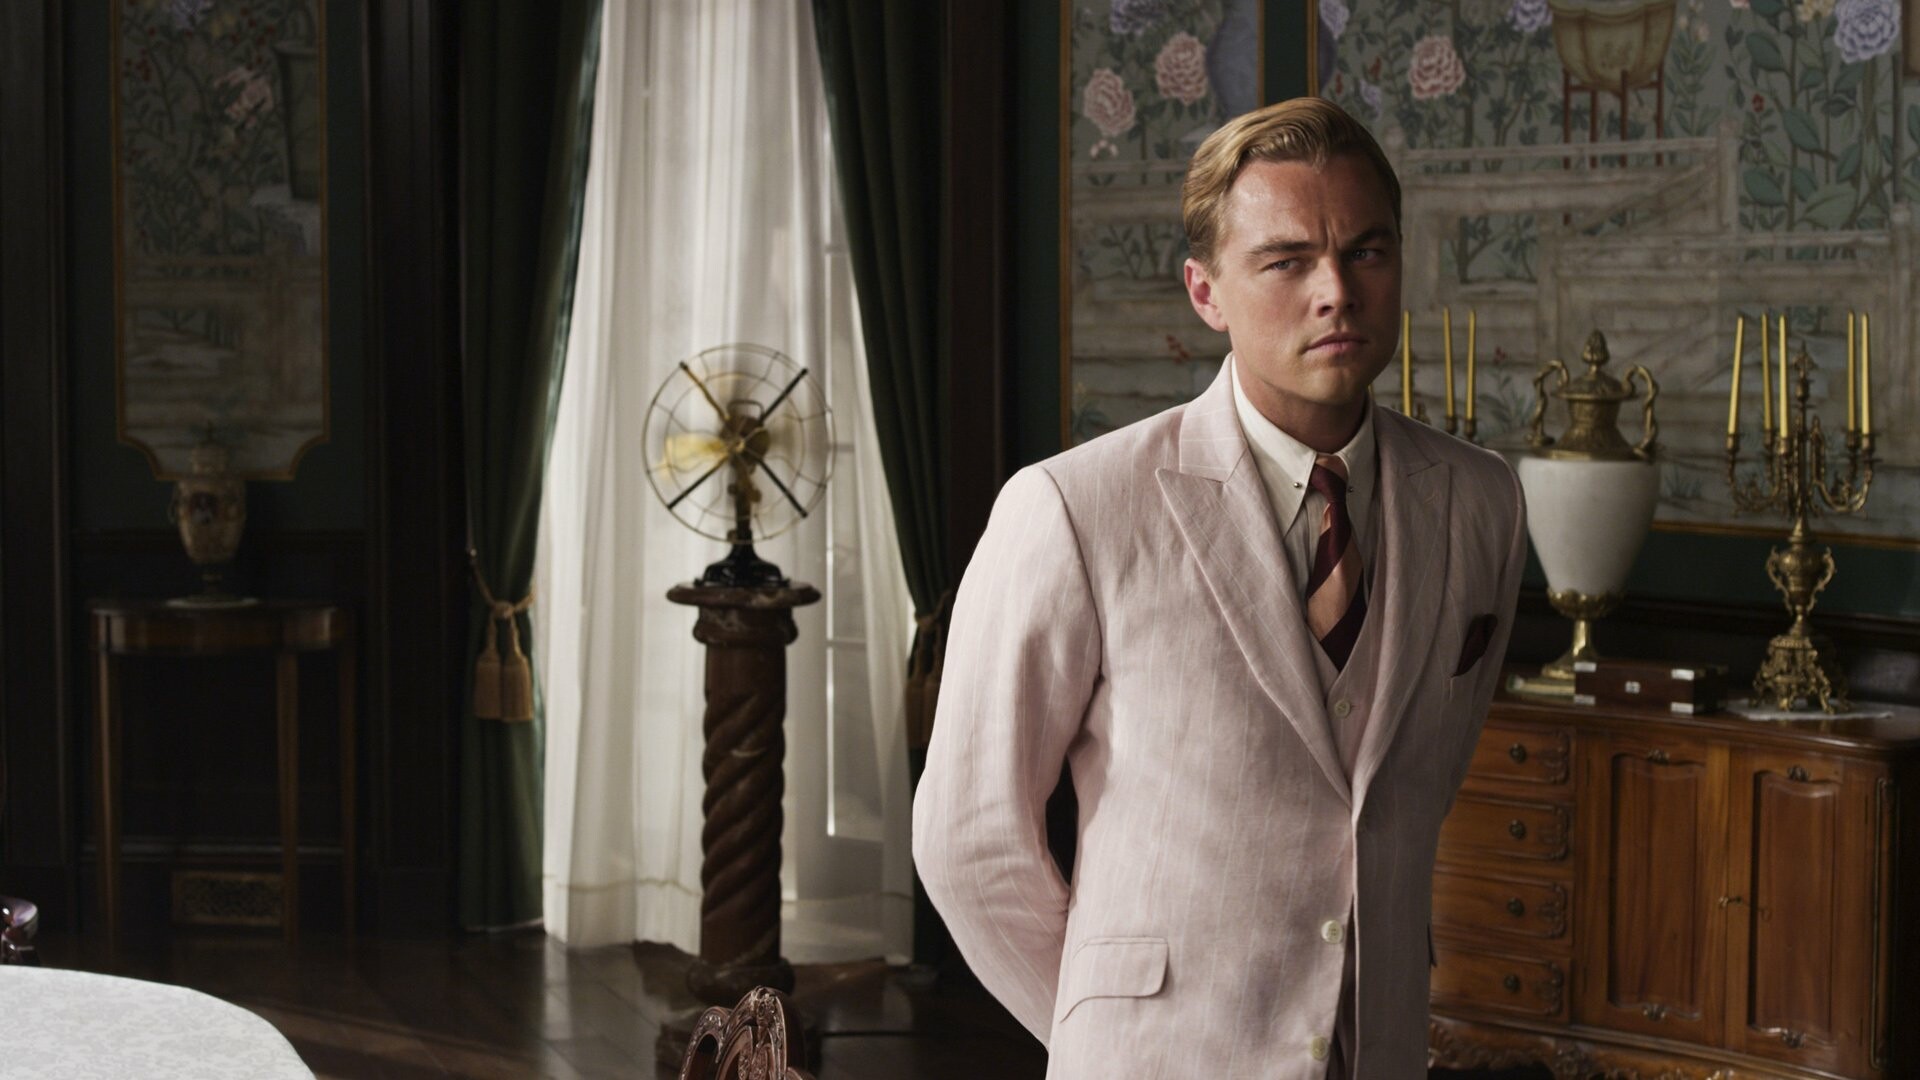 The Great Gatsby: Jay, A mysterious millionaire who hosts wild parties. 1920x1080 Full HD Wallpaper.